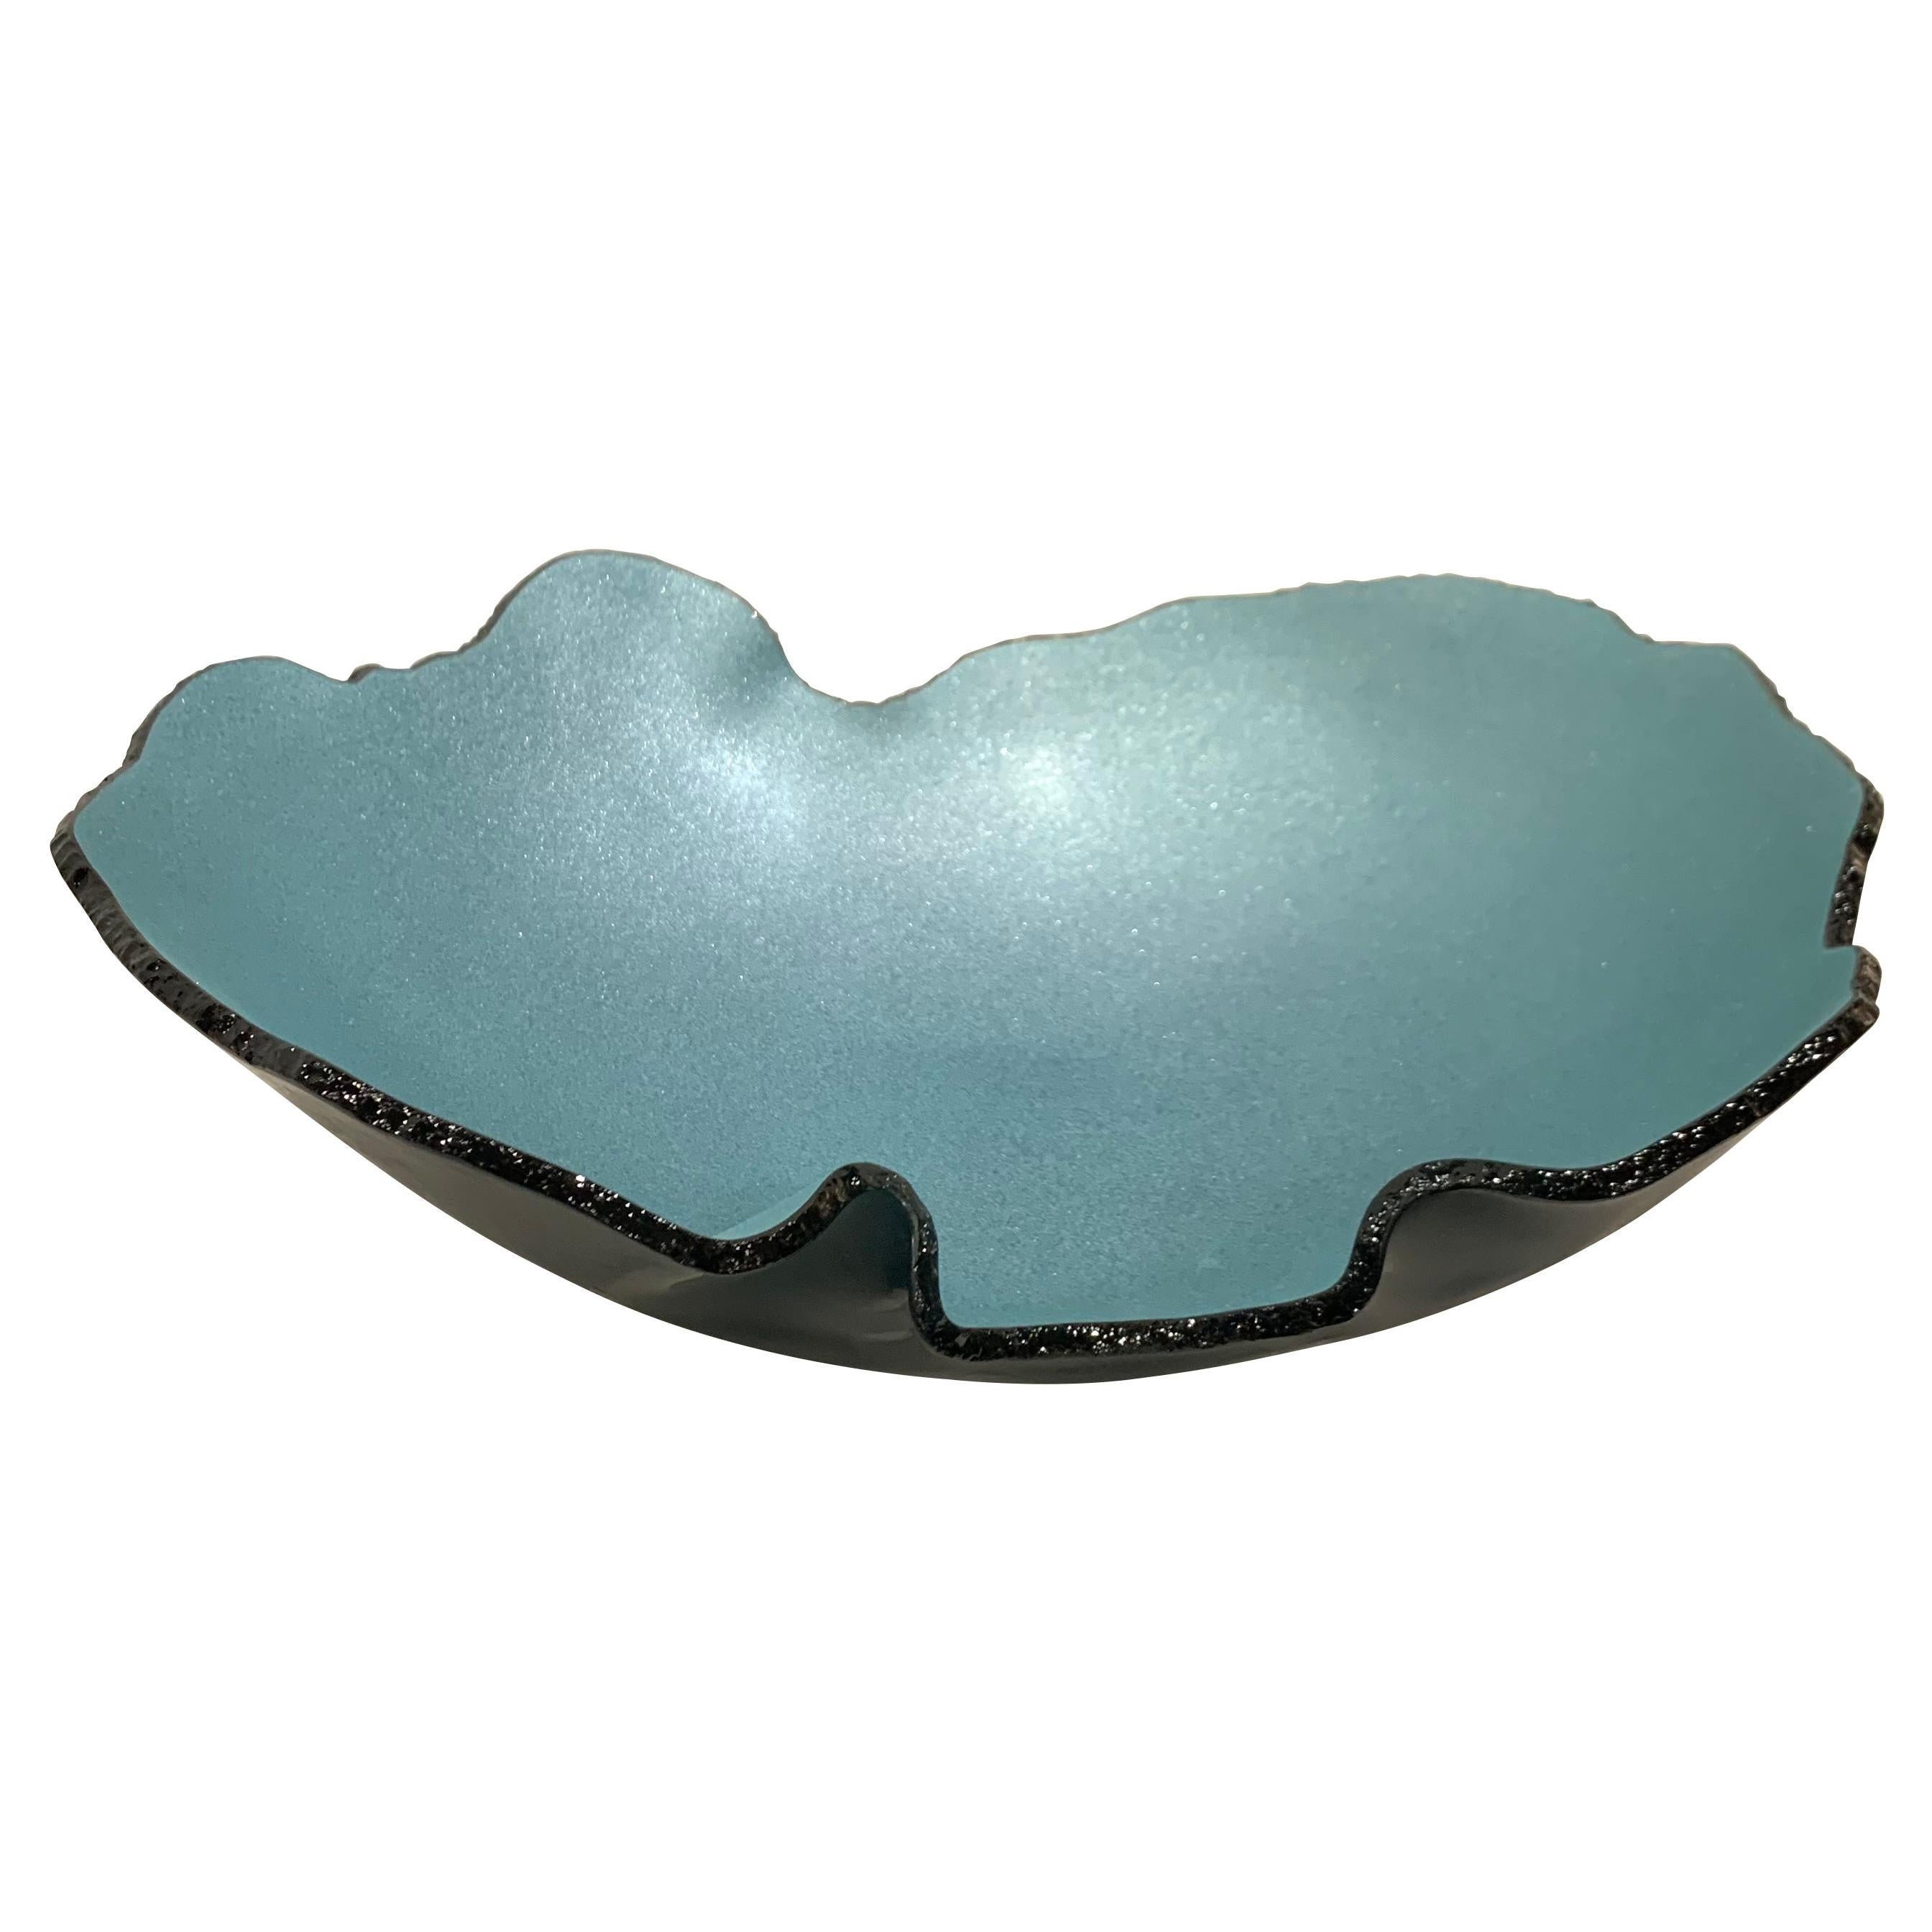 Turquoise and Charcoal Grey Free Form Glass Bowl, Brazil, Contemporary